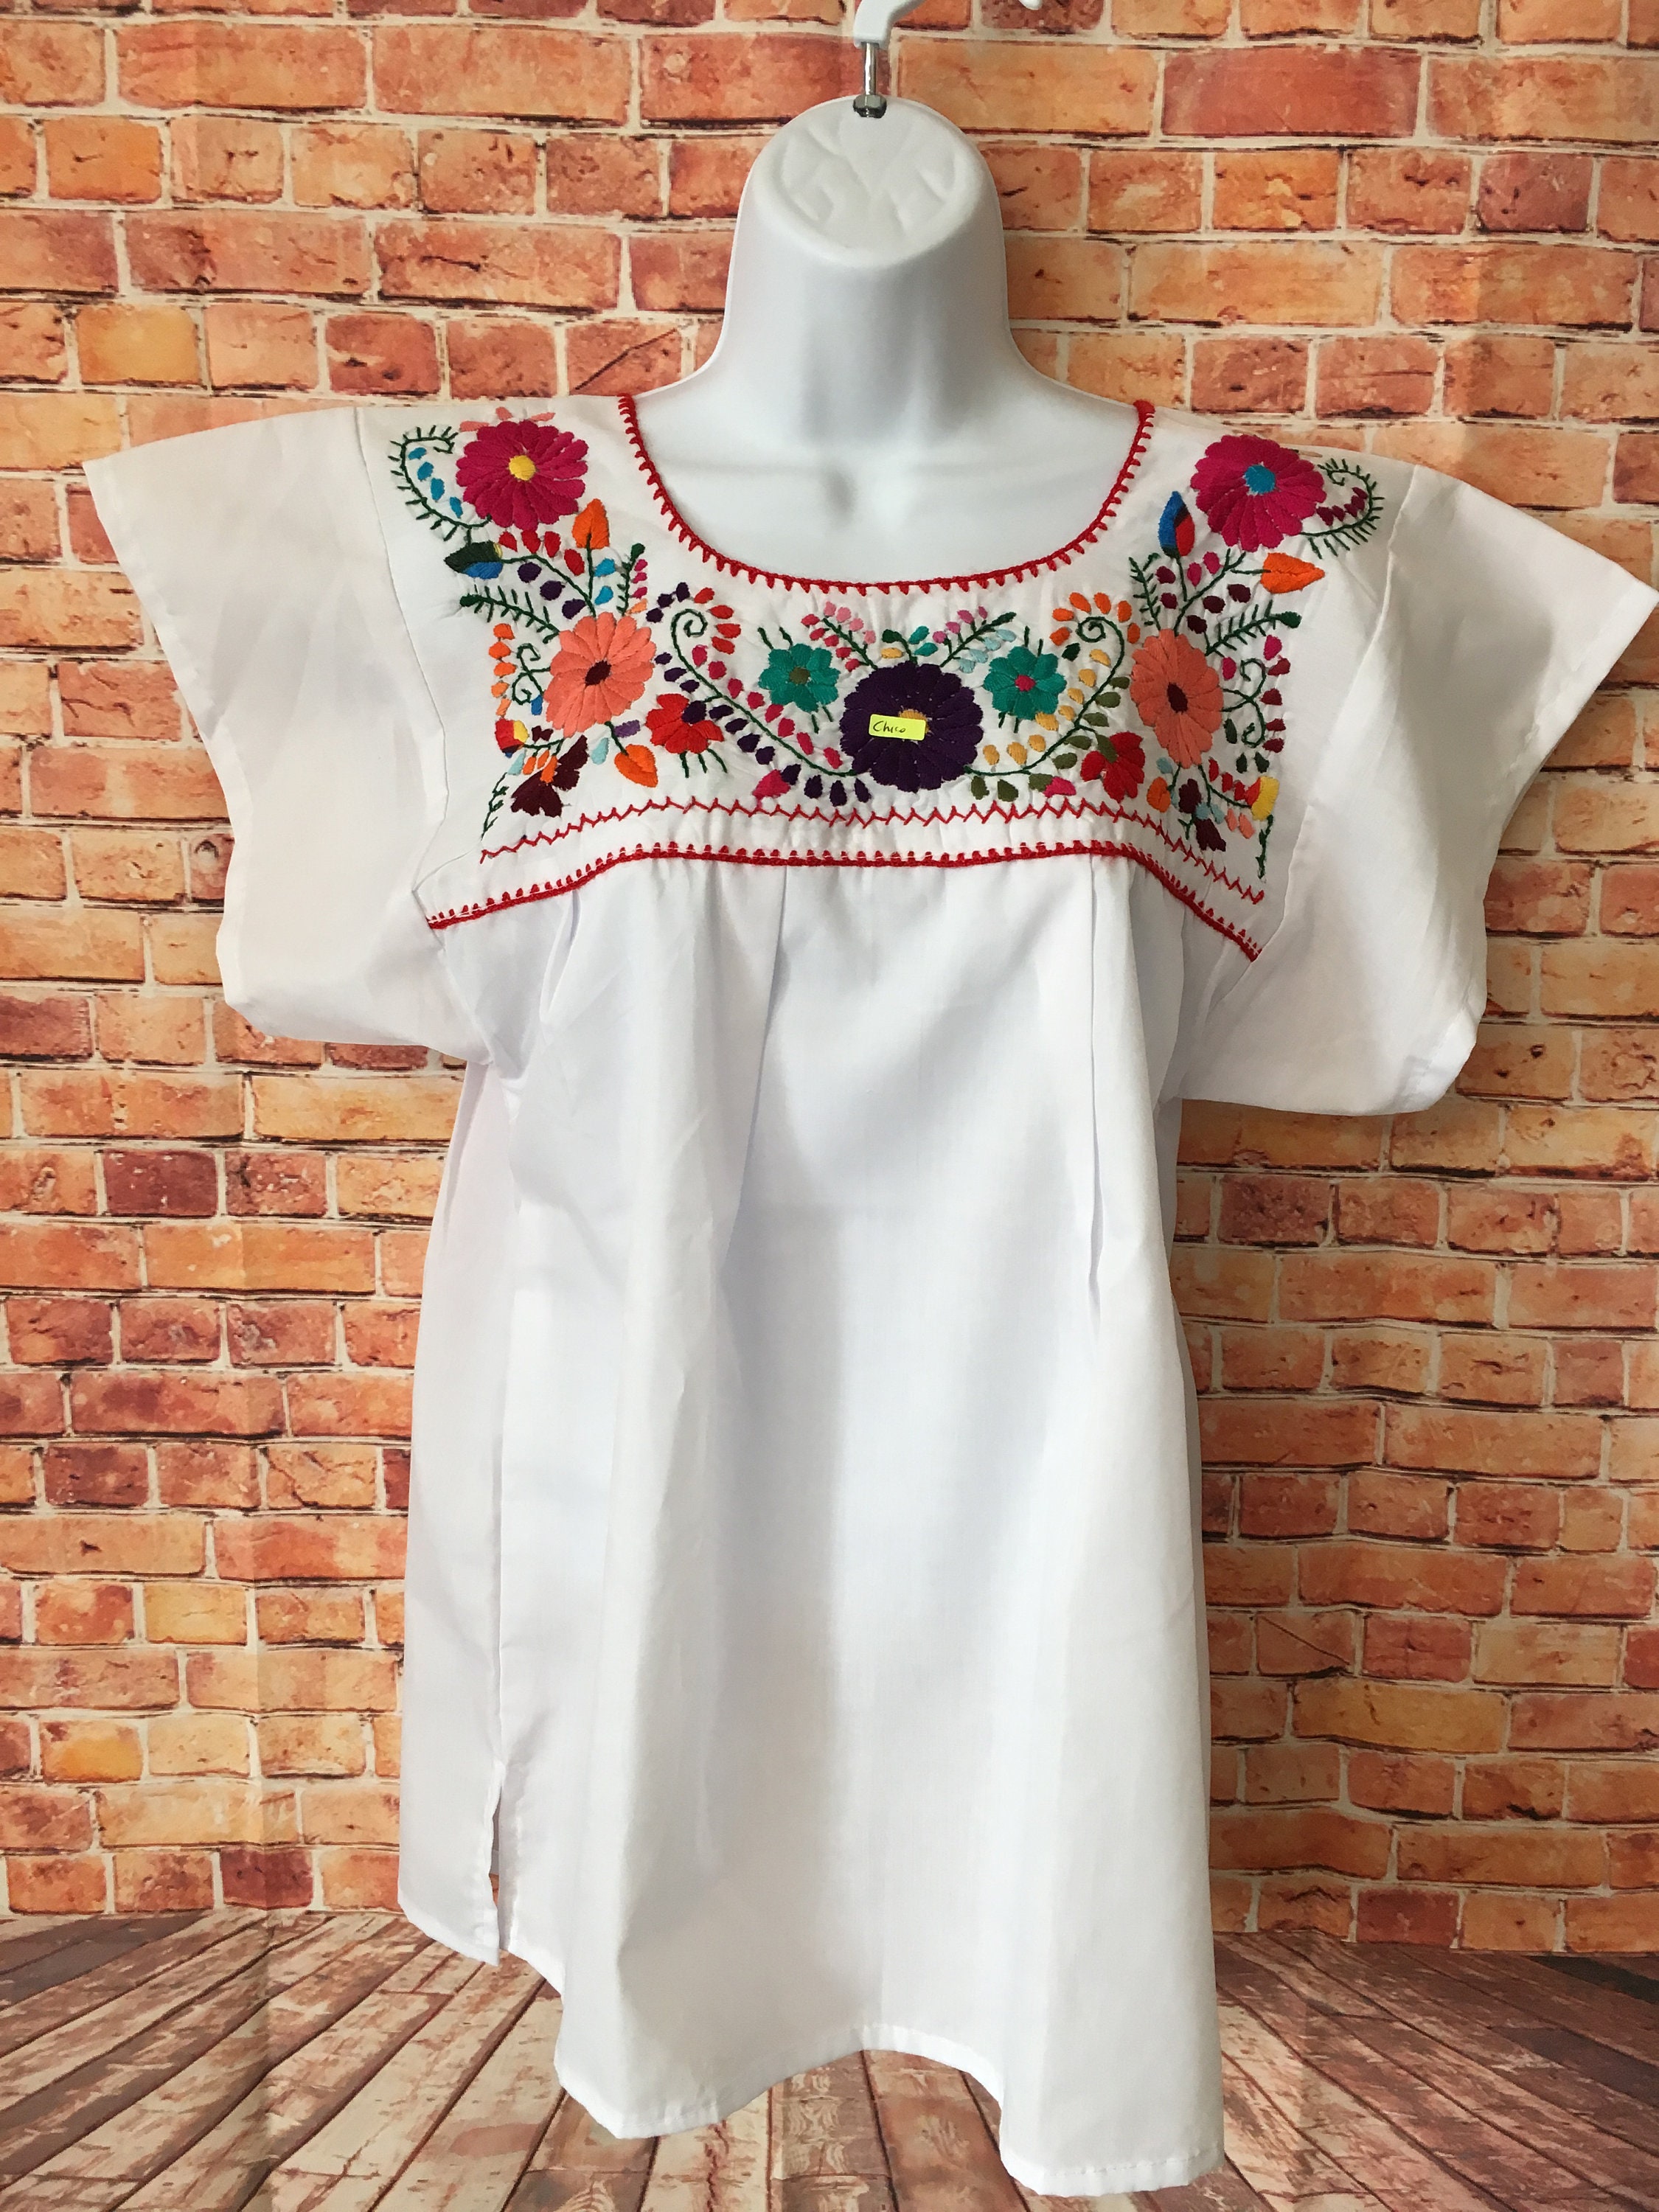 Embroidered Mexican Shirt Small puebla Style - Etsy